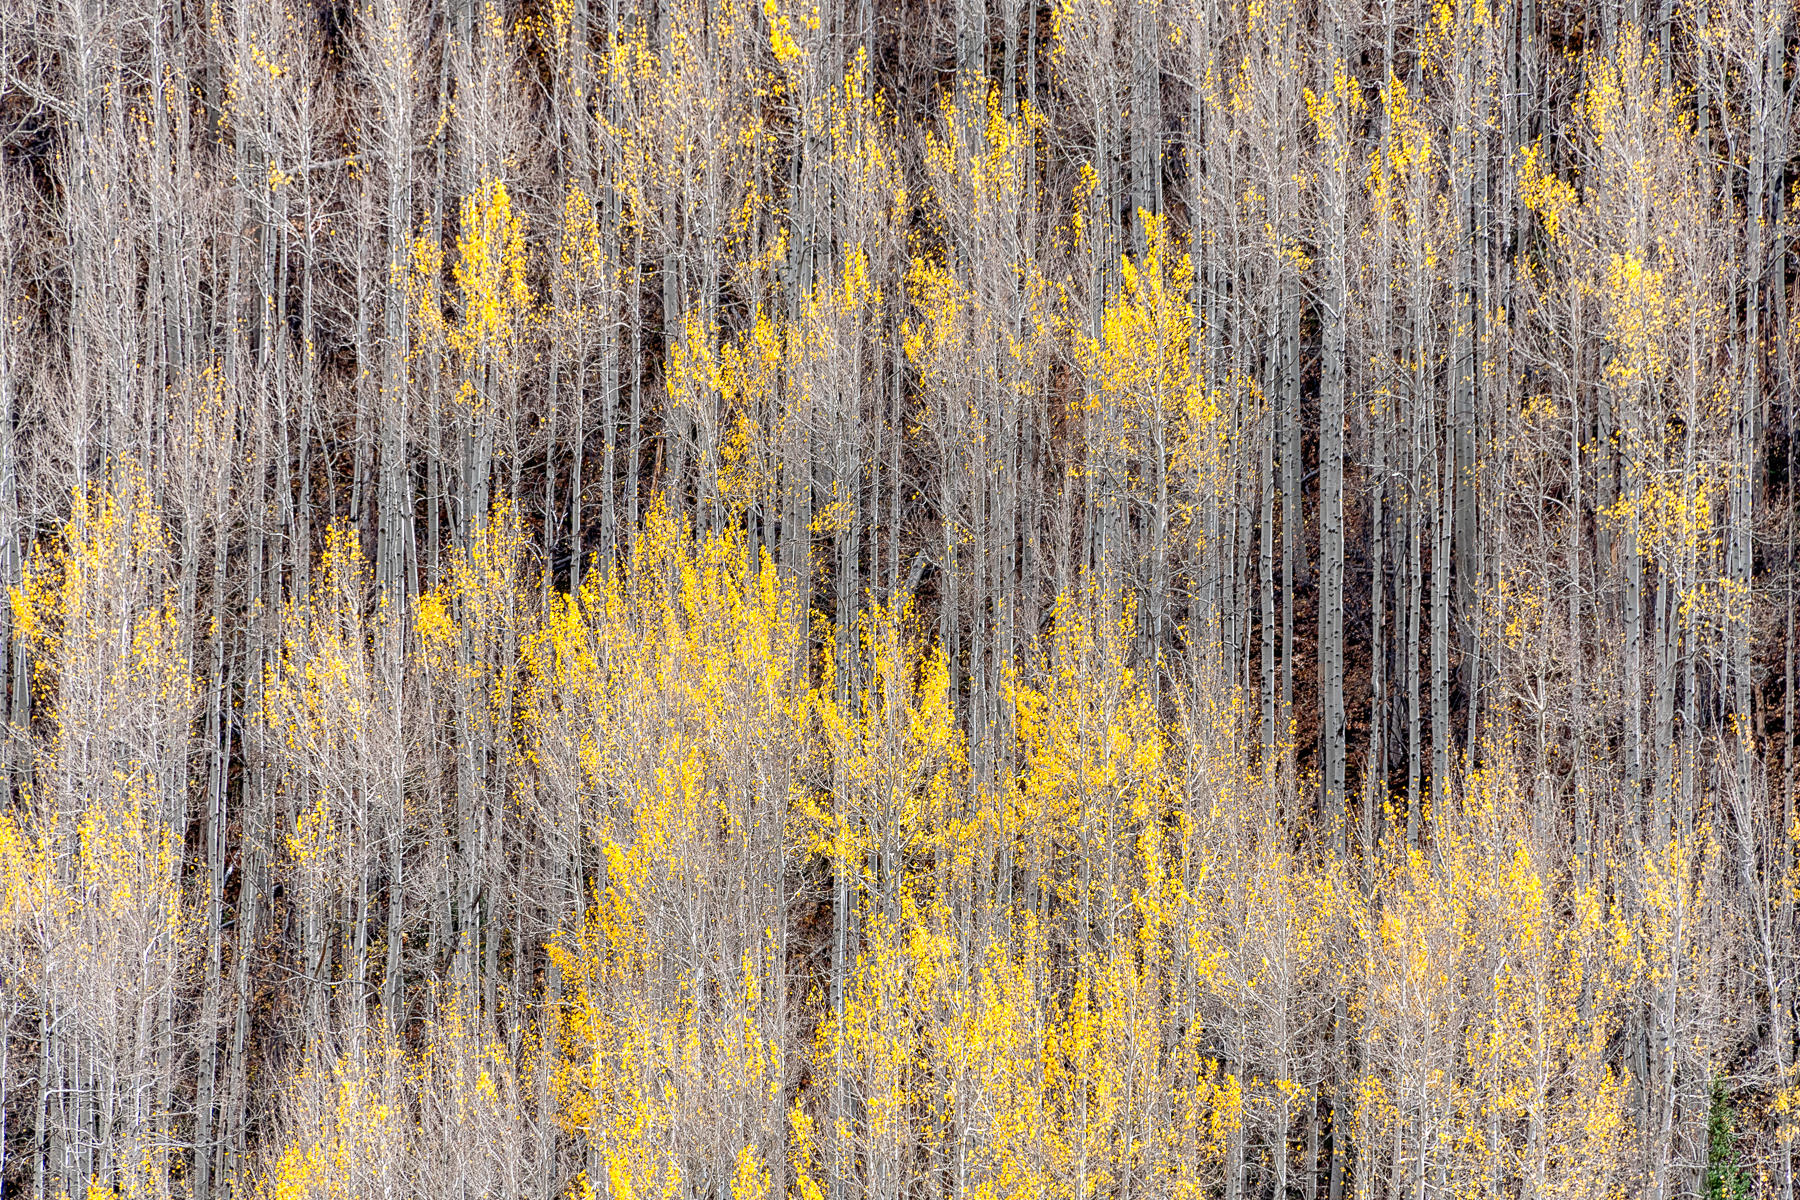 Aspens in late fall : Trees, Our Oxygen : ELIZABETH SANJUAN PHOTOGRAPHY